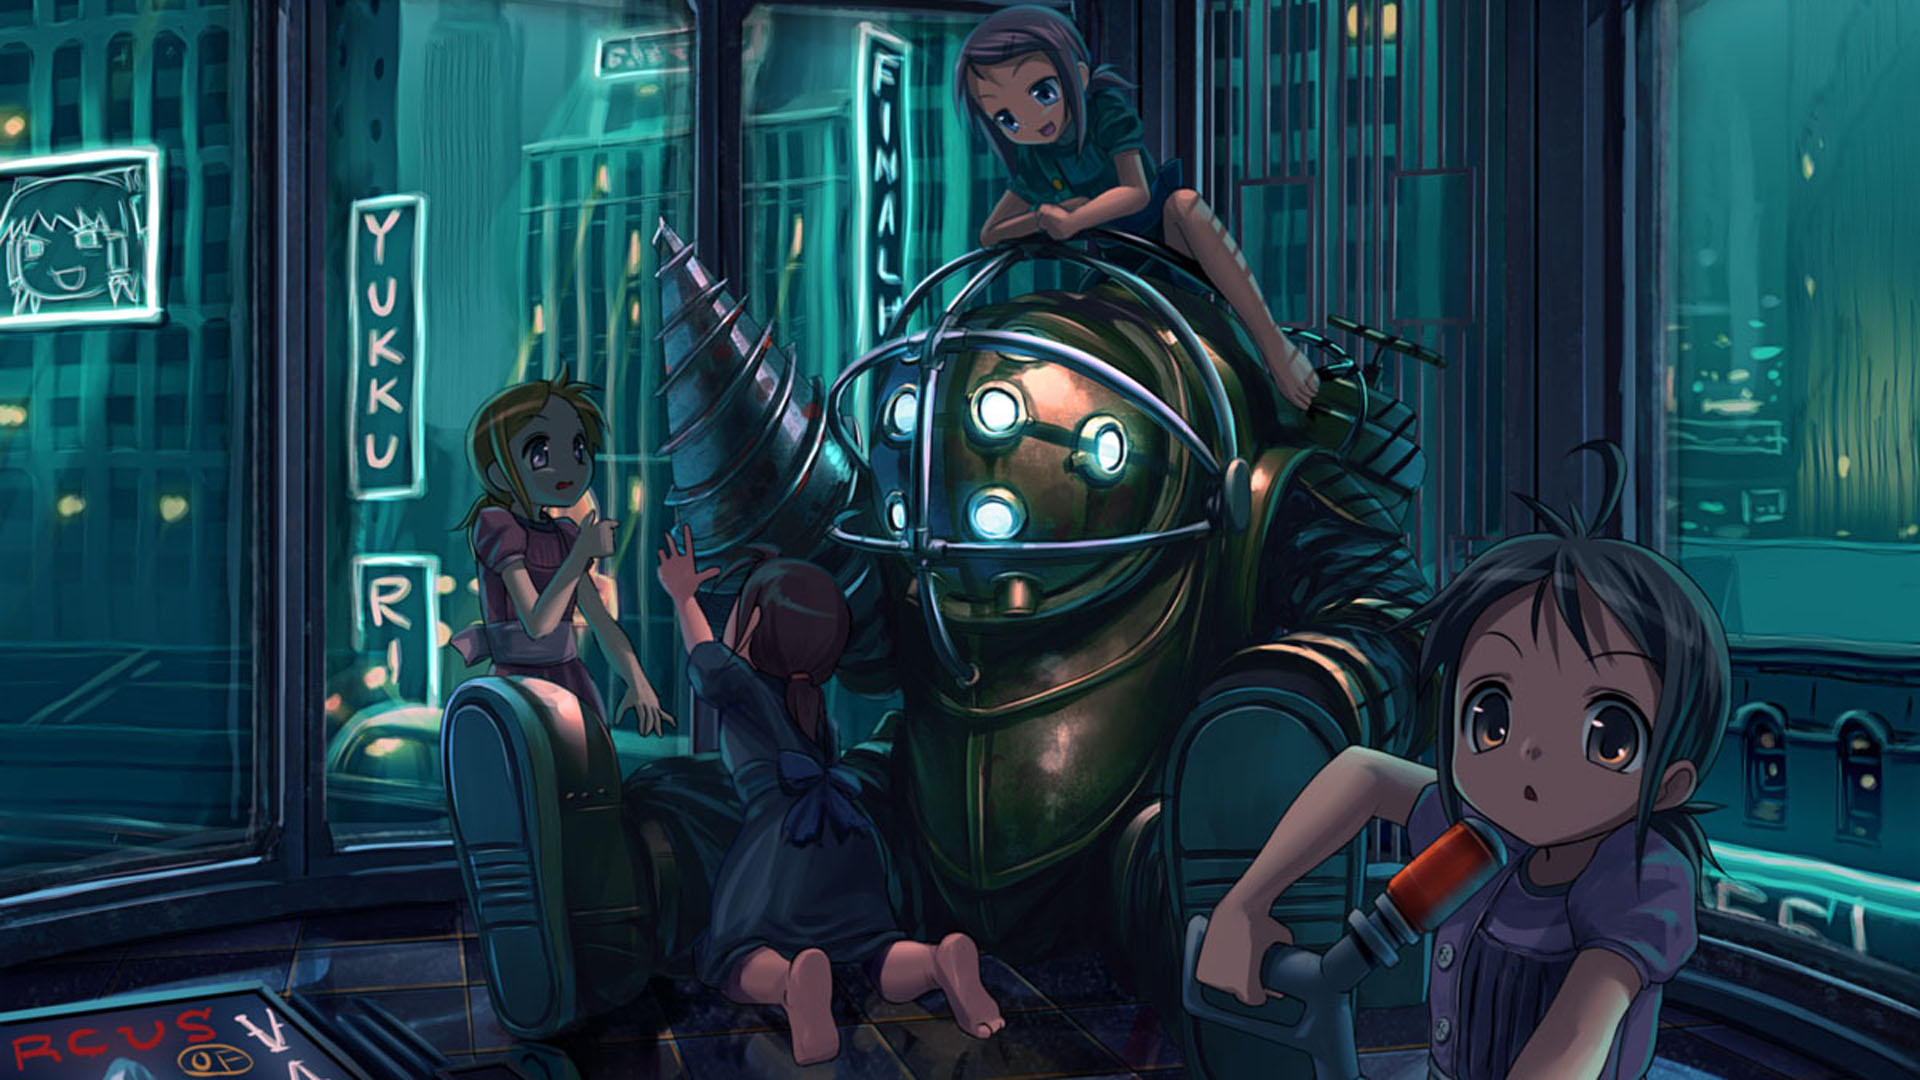 I Found A Freaking Adorable Bioshock Wallpaper But Sadly Don T